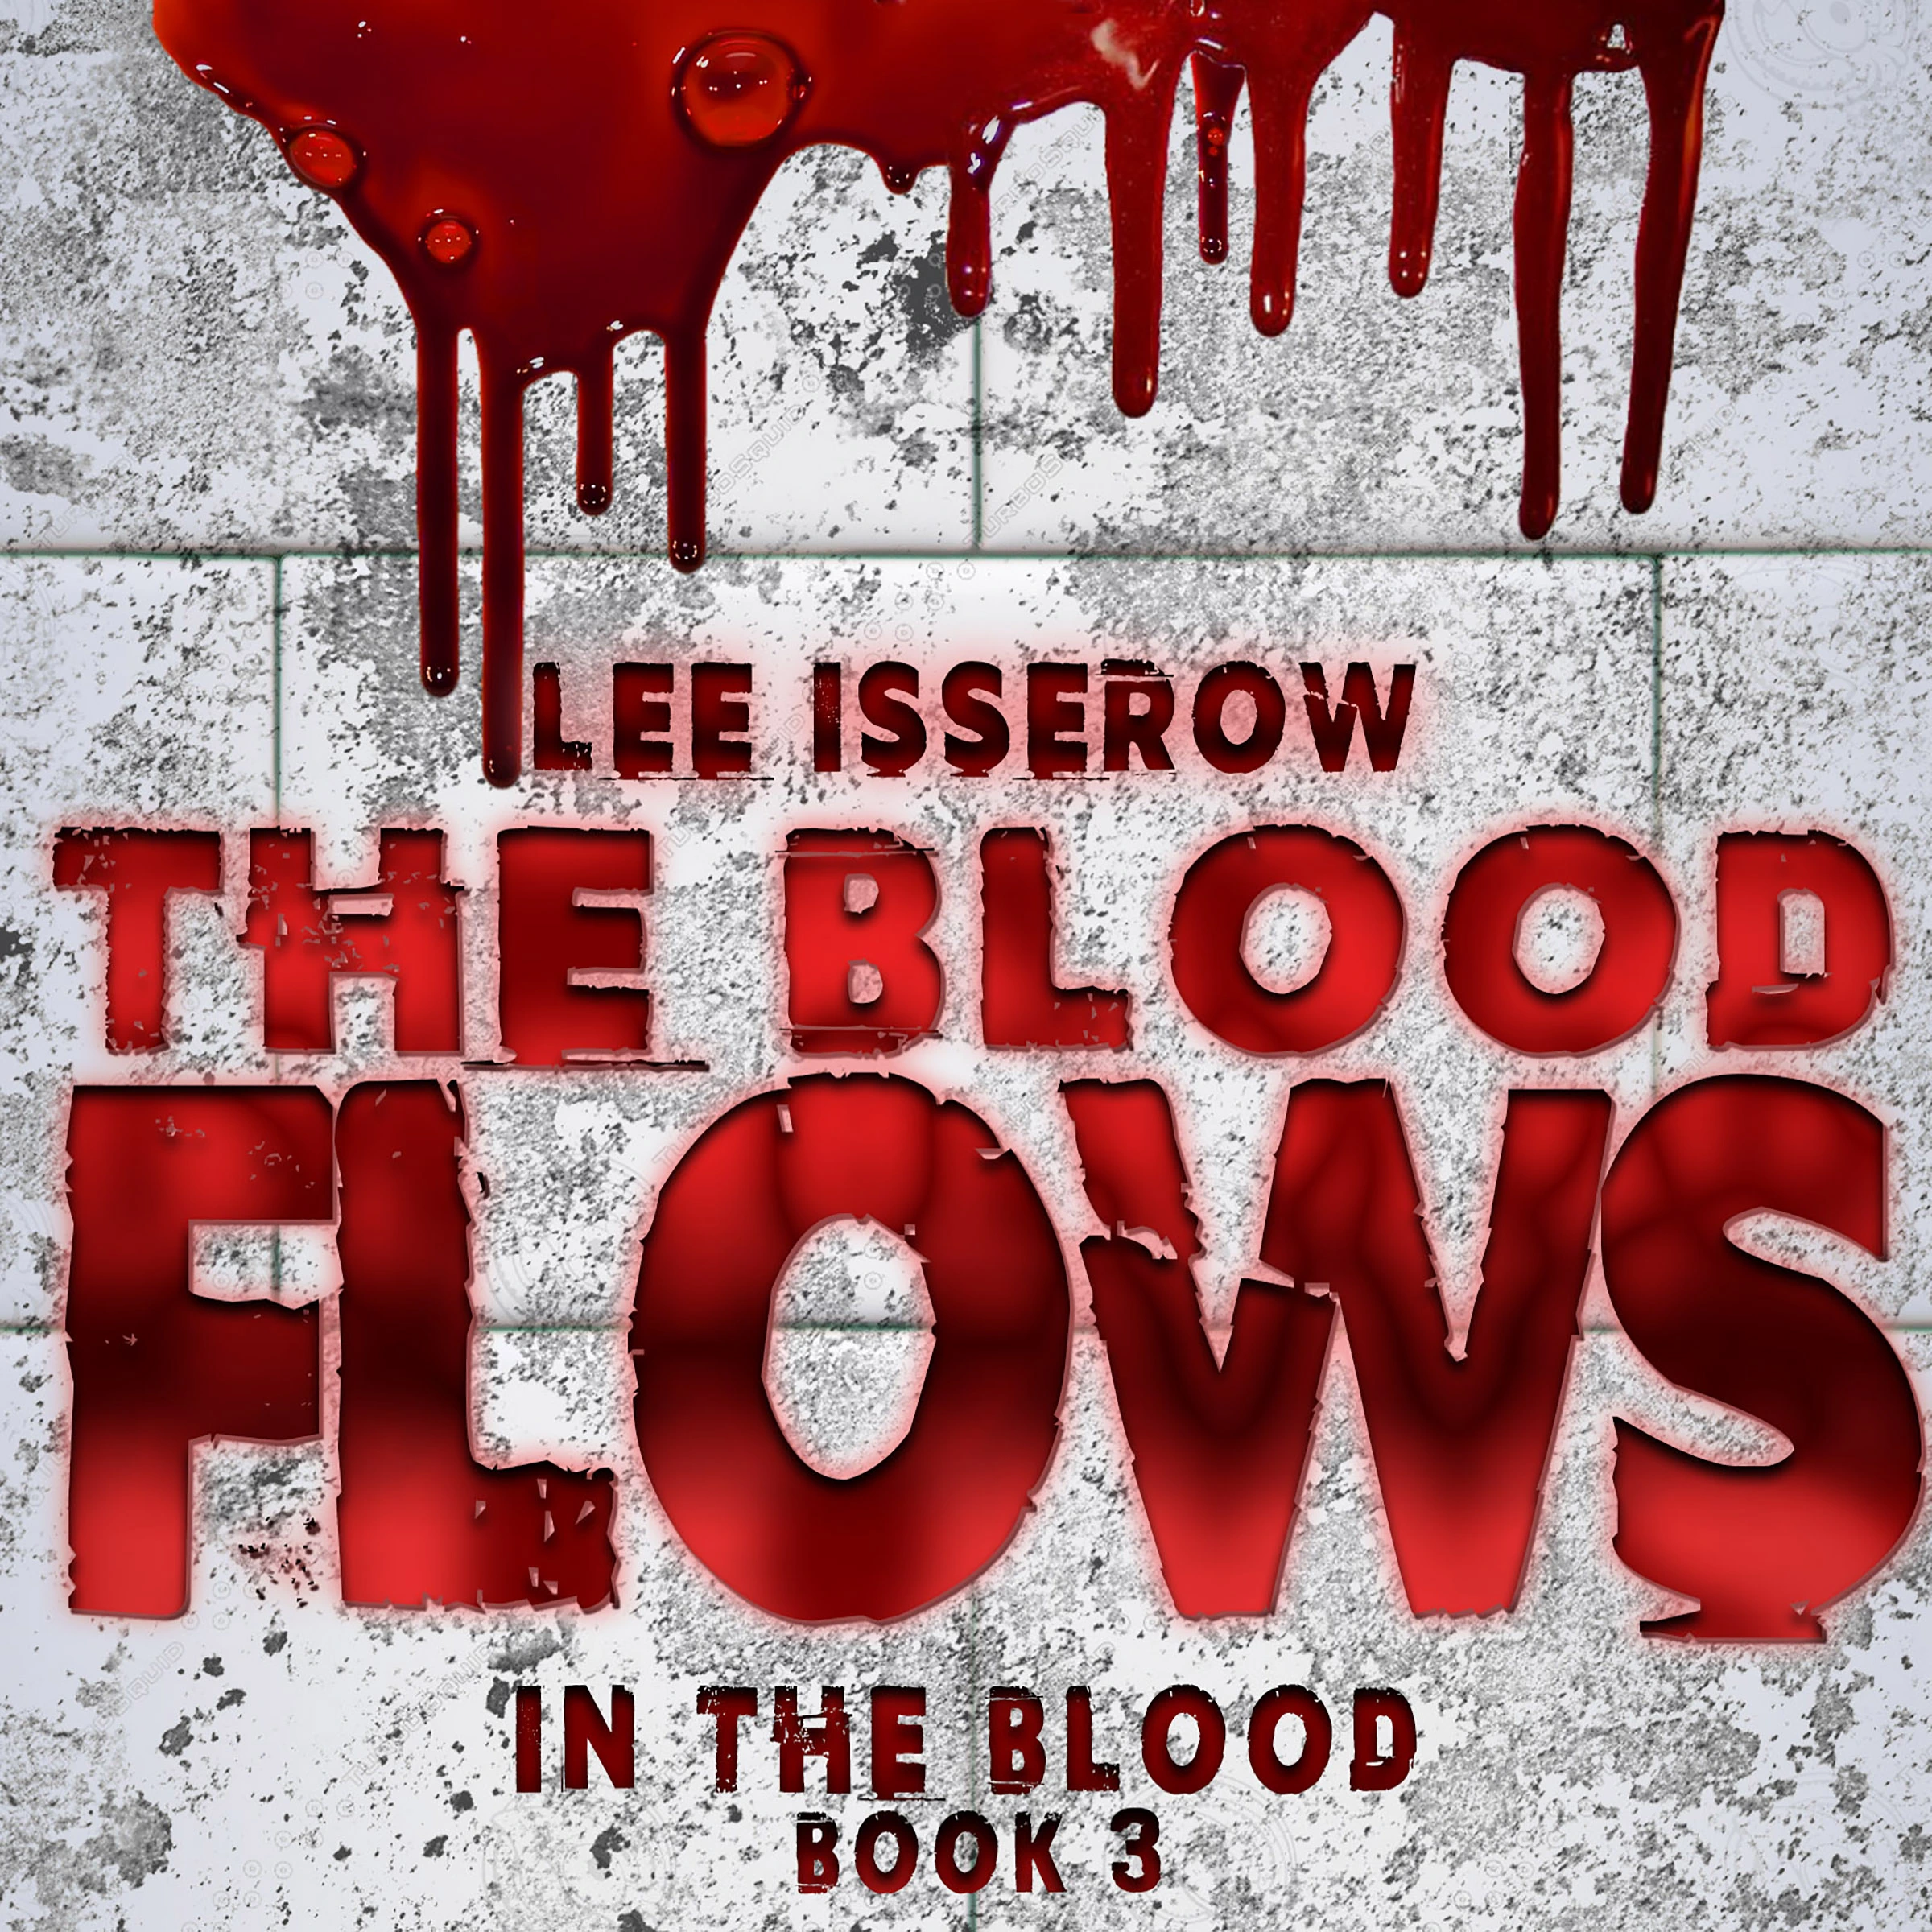 The Blood Flows by Lee Isserow Audiobook